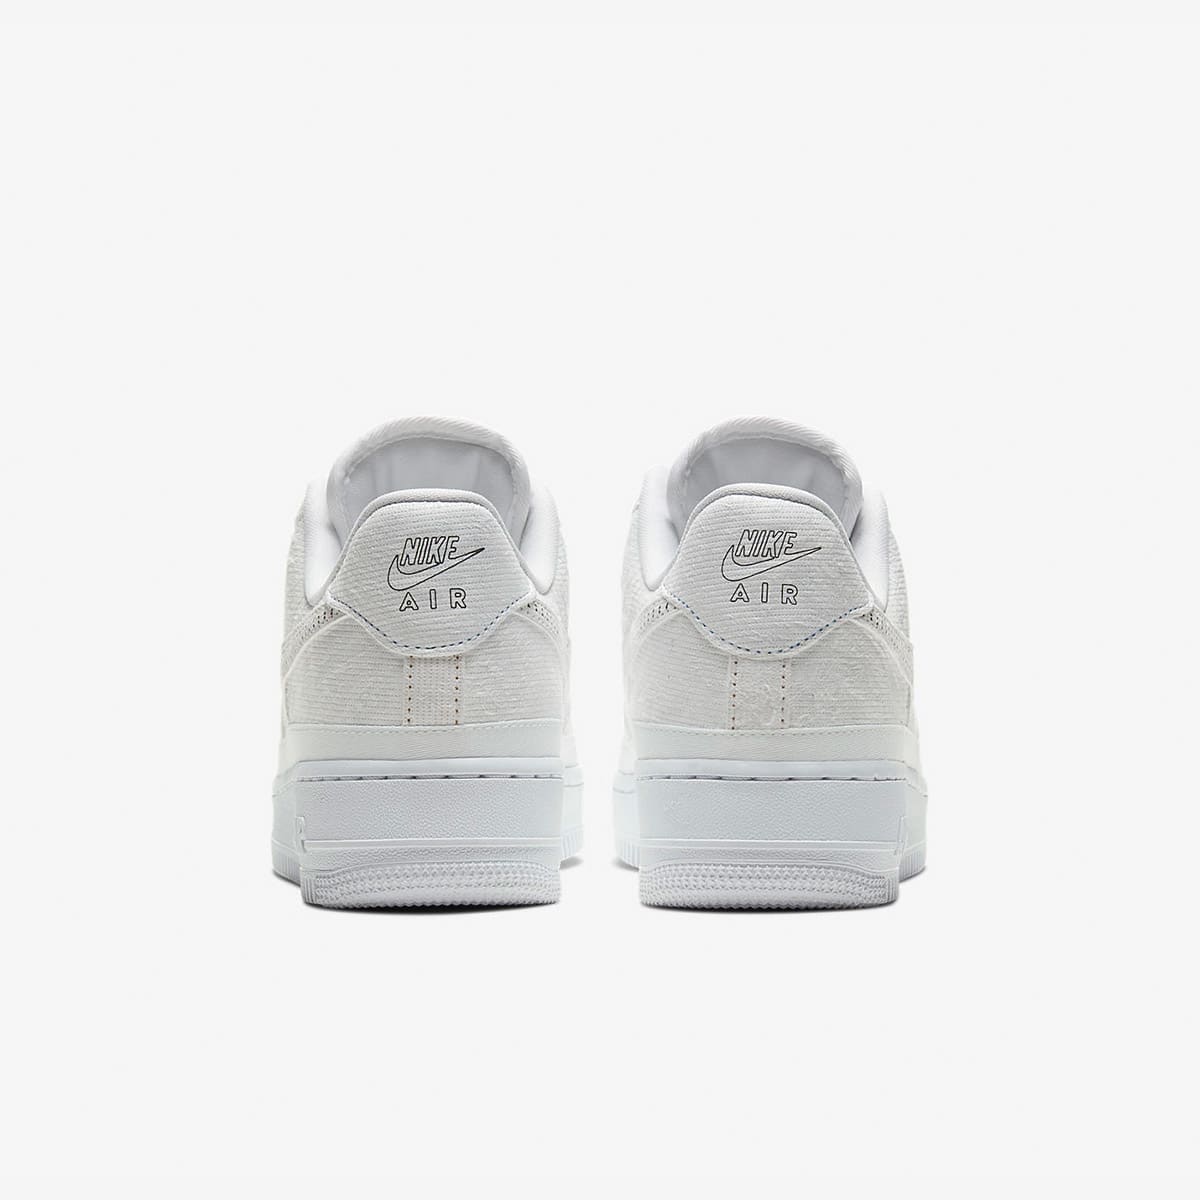 Nike Air Force 1 07 LX (White & Multi) | END. Launches